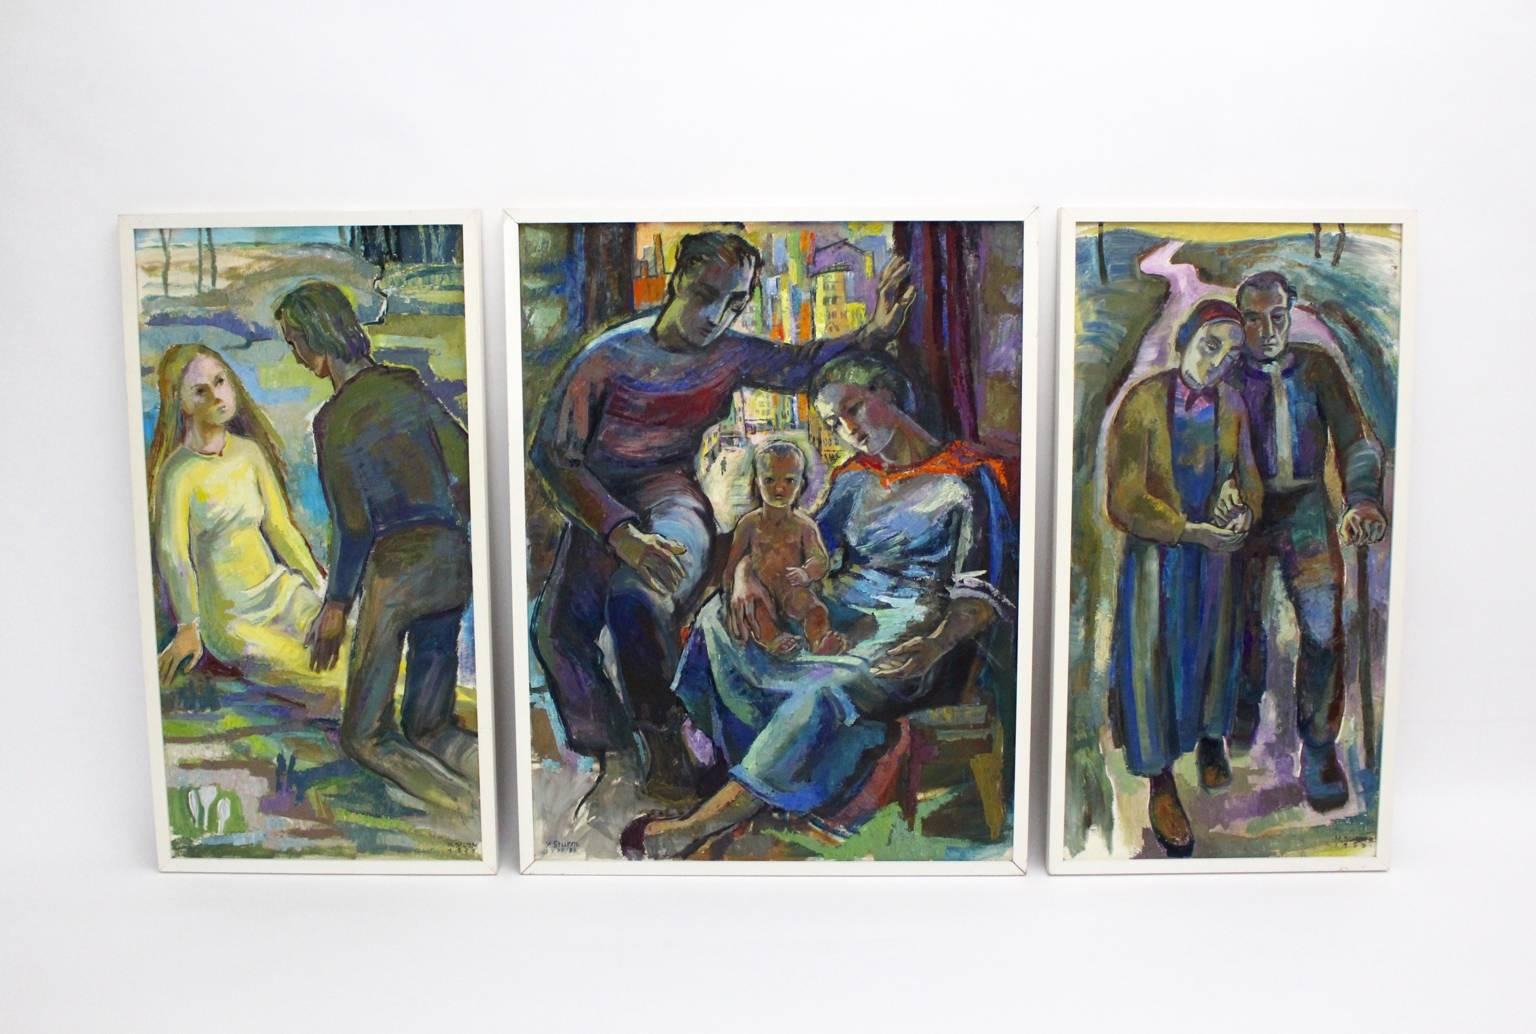 Modern painting in three pieces, Triptychon by Maria Sturm.
Oil on pressboard shows the motif 